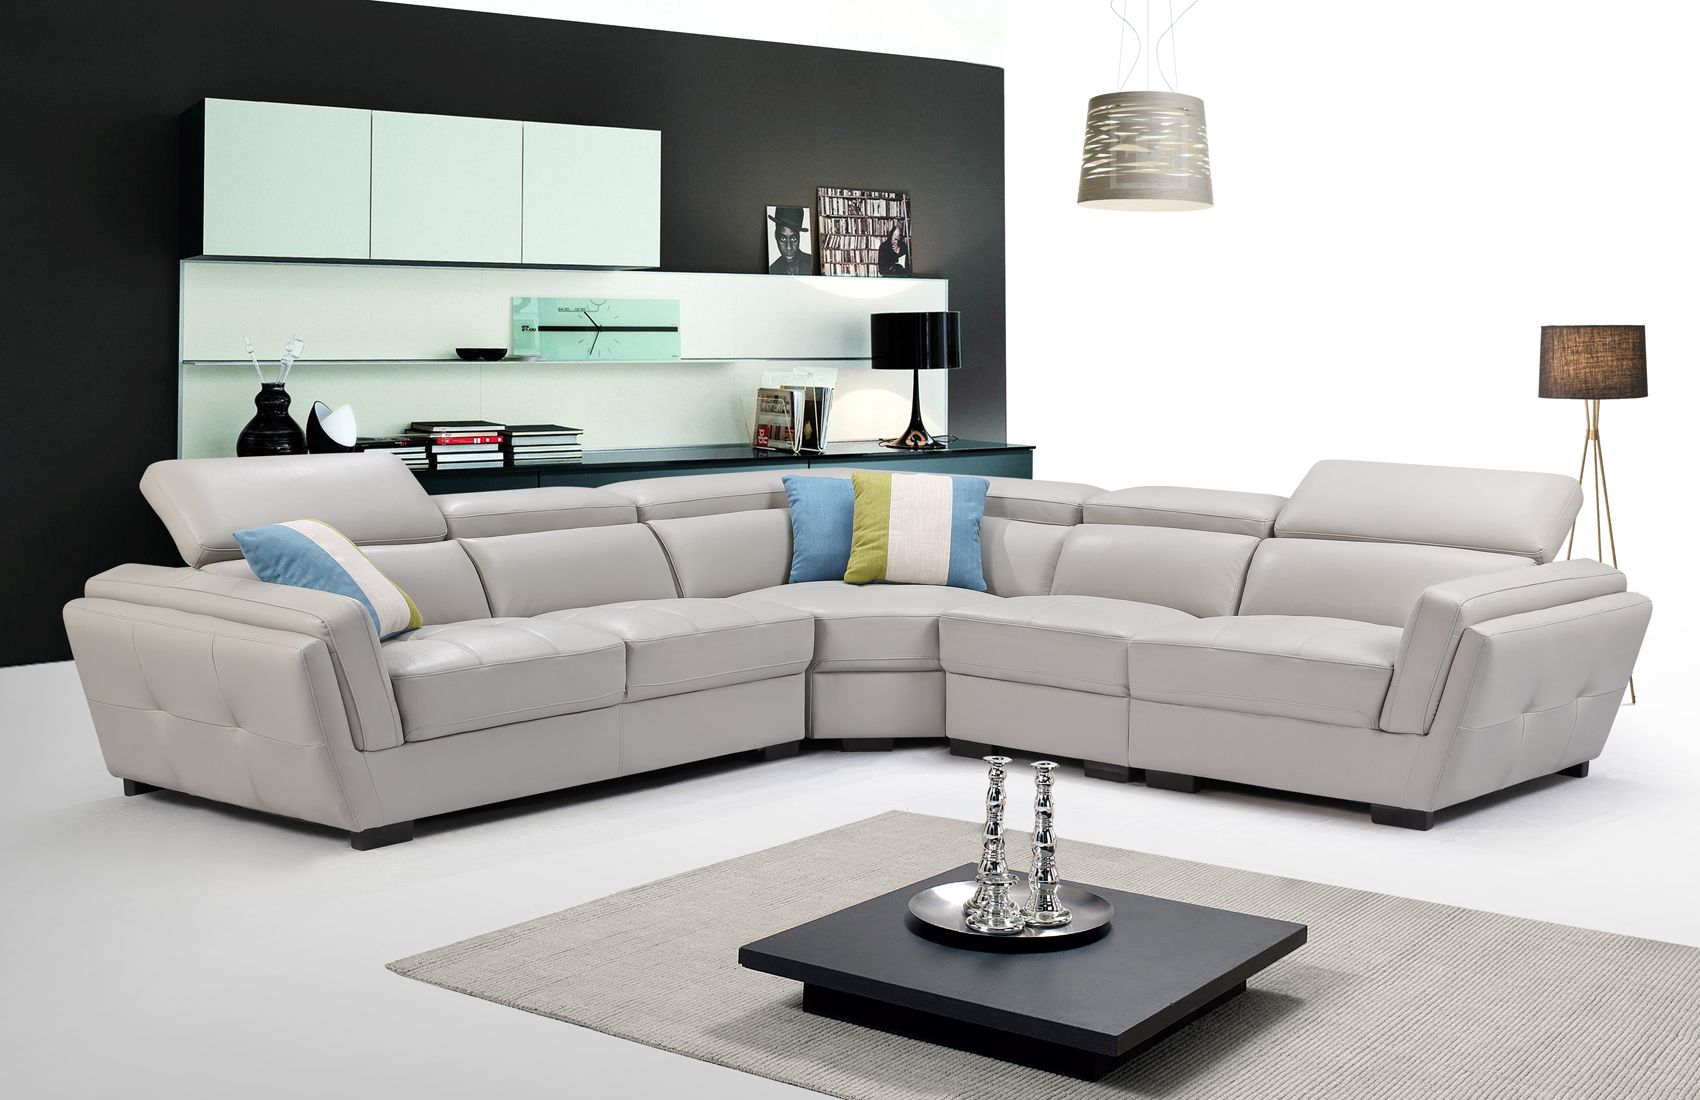 Advanced Adjustable Modern Leather L Shape Sectional With Pillows Pertaining To Modern L Shaped Sofa Sectionals (Gallery 17 of 20)